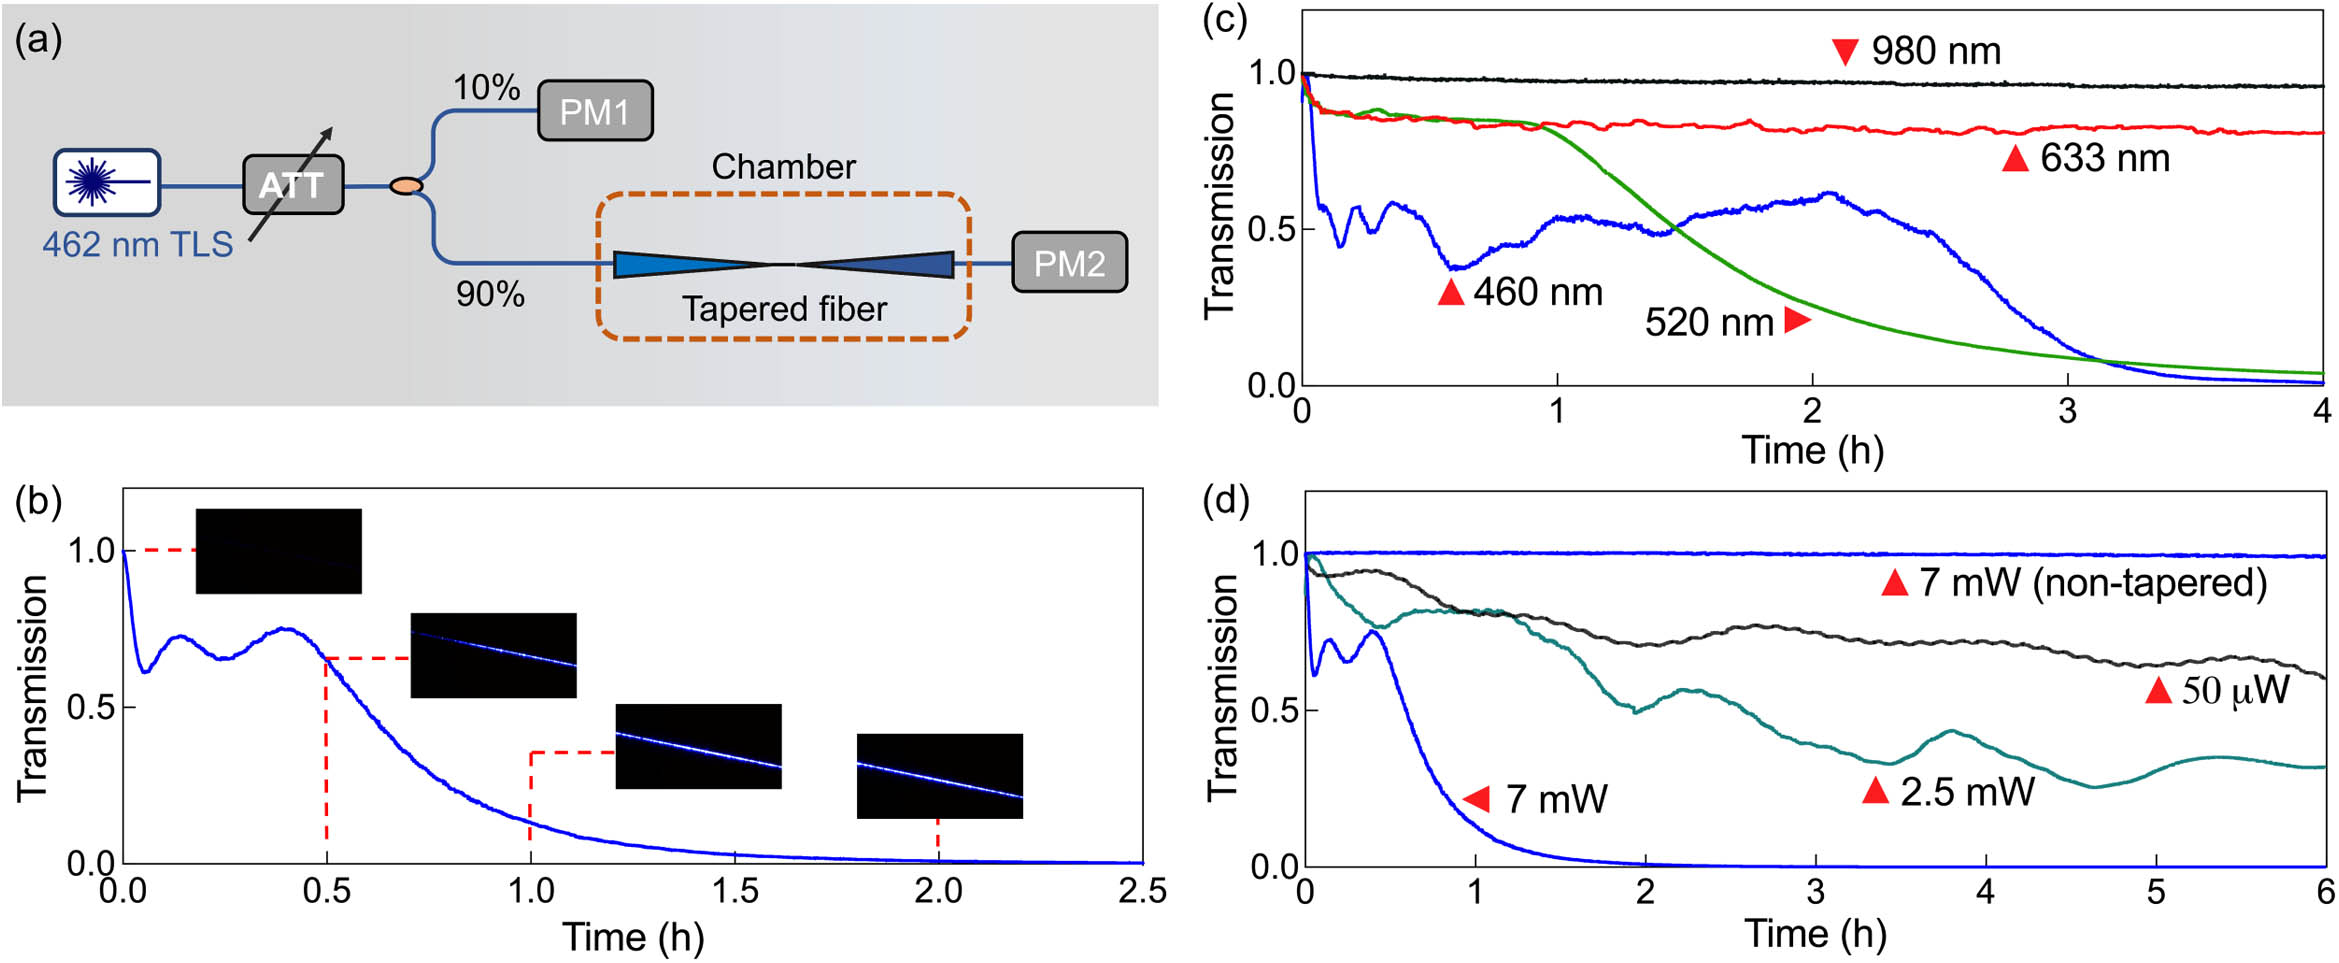 Photodarkening in optical nanofibers. (a) Experimental setup to measure the transmission through a nanofiber. TLS, tunable laser system; ATT, attenuator; and PM, power meter. (b) Normalized transmission through the 460HP nanofiber (500 nm waist) for a fixed pump power of 7 mW at 462 nm. Inset: images of the waist of the nanofiber over times of 0/30/60/120 min, the exposure time of the CCD camera was set to the lowest value at the beginning. (c) Normalized transmission through the 980HP nanofiber (500 nm waist) for a fixed pump power of 7 mW and different wavelengths. (d) Normalized transmission through the 460HP nanofiber (500 nm waist) for a fixed wavelength of 460 nm and different pump powers. The transmission of an untapered fiber is given for comparison. All transmissions measured on PM2 were normalized based on the power coupled into the tapered fiber, which is nine times the reference power as measured on PM1.